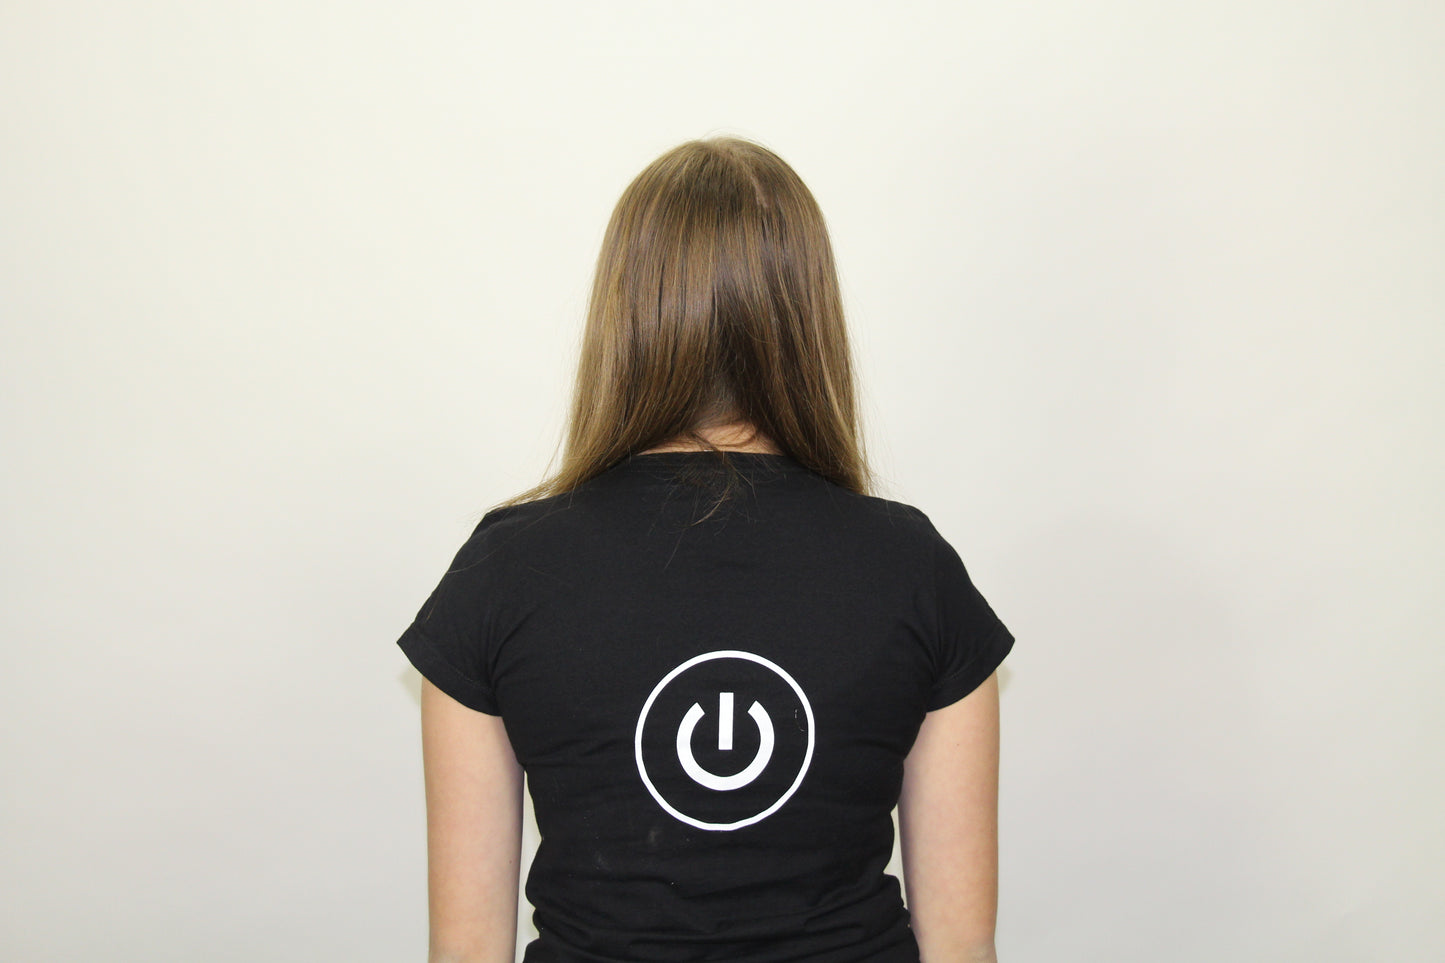 iCrazy, Black Powerup T-Shirt (Mens and Ladies cuts)